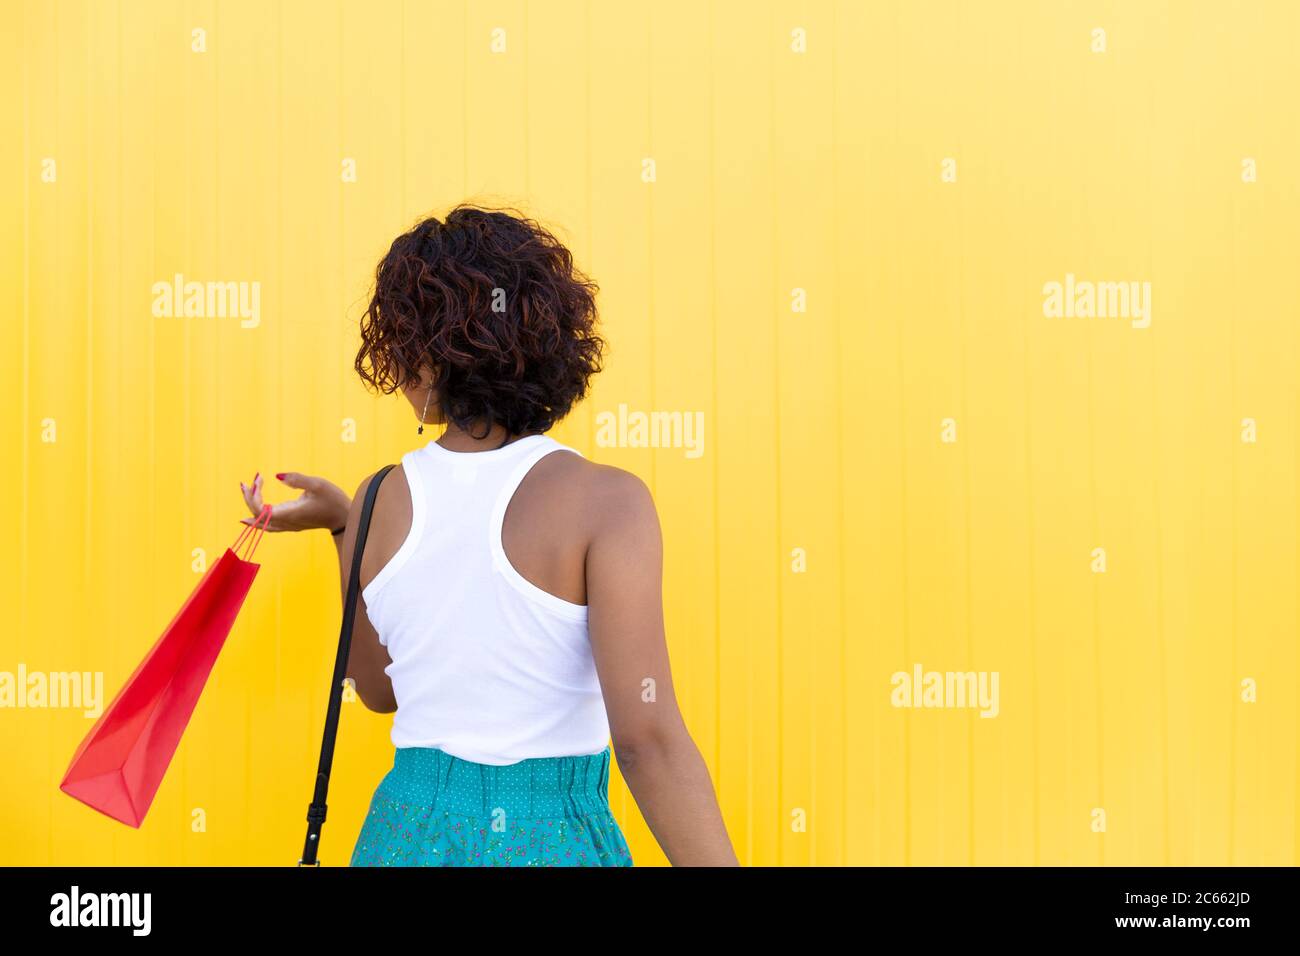 Back view of woman walking with a shopping bag next to a yellow wall. Space for text. Concept of shopping, gifts and sales. Stock Photo